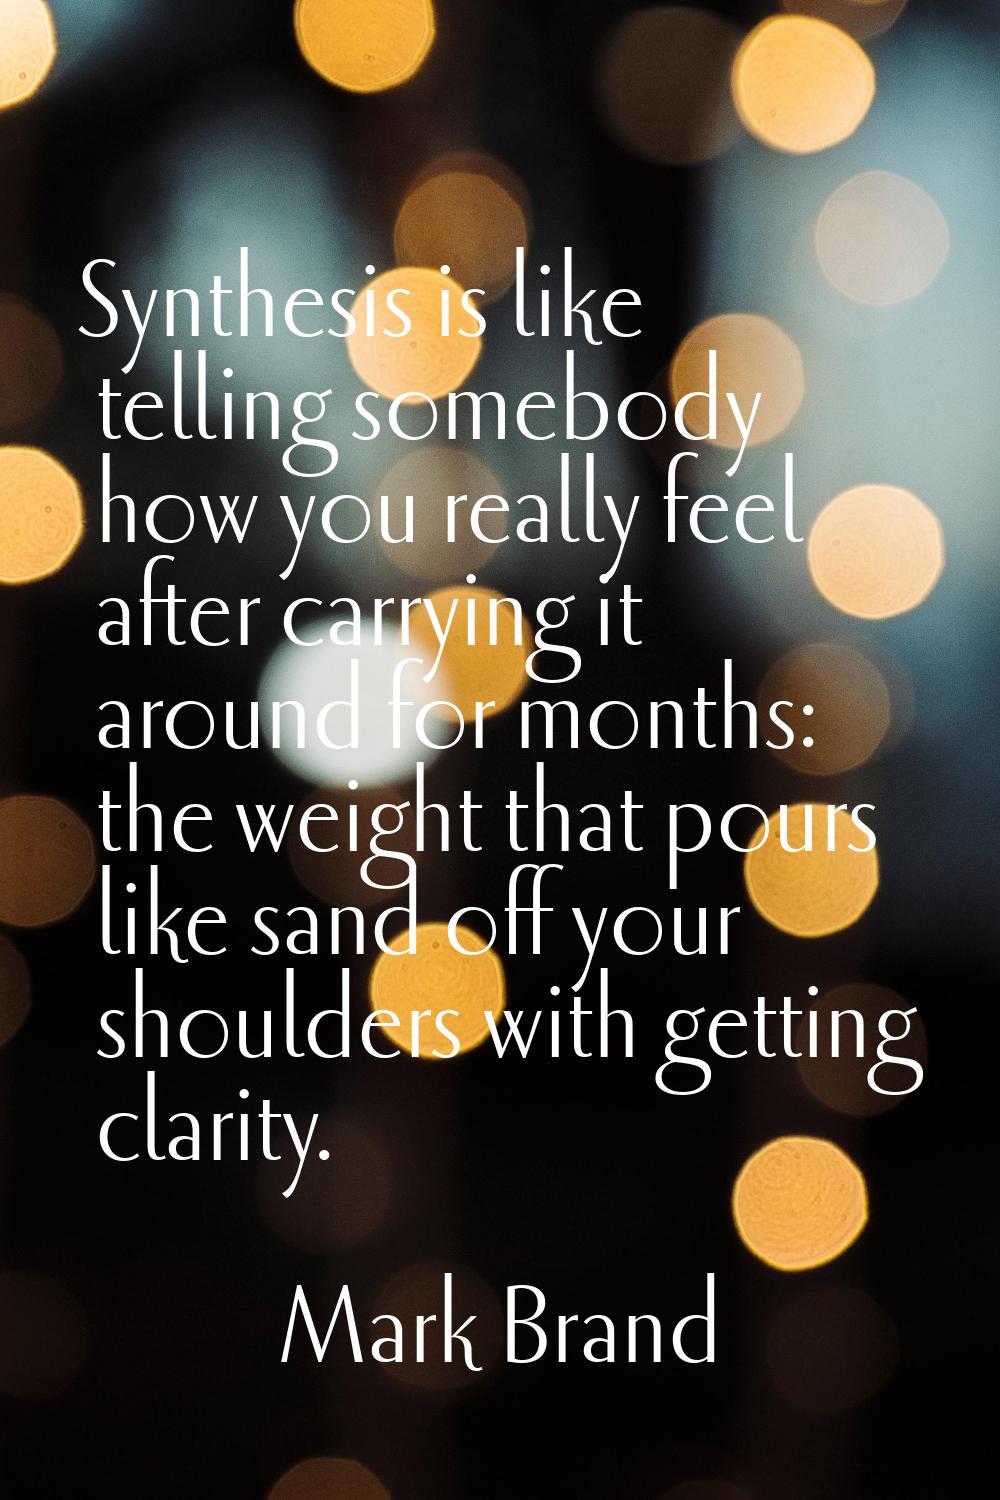 Synthesis is like telling somebody how you really feel after carrying it around for months: the wei